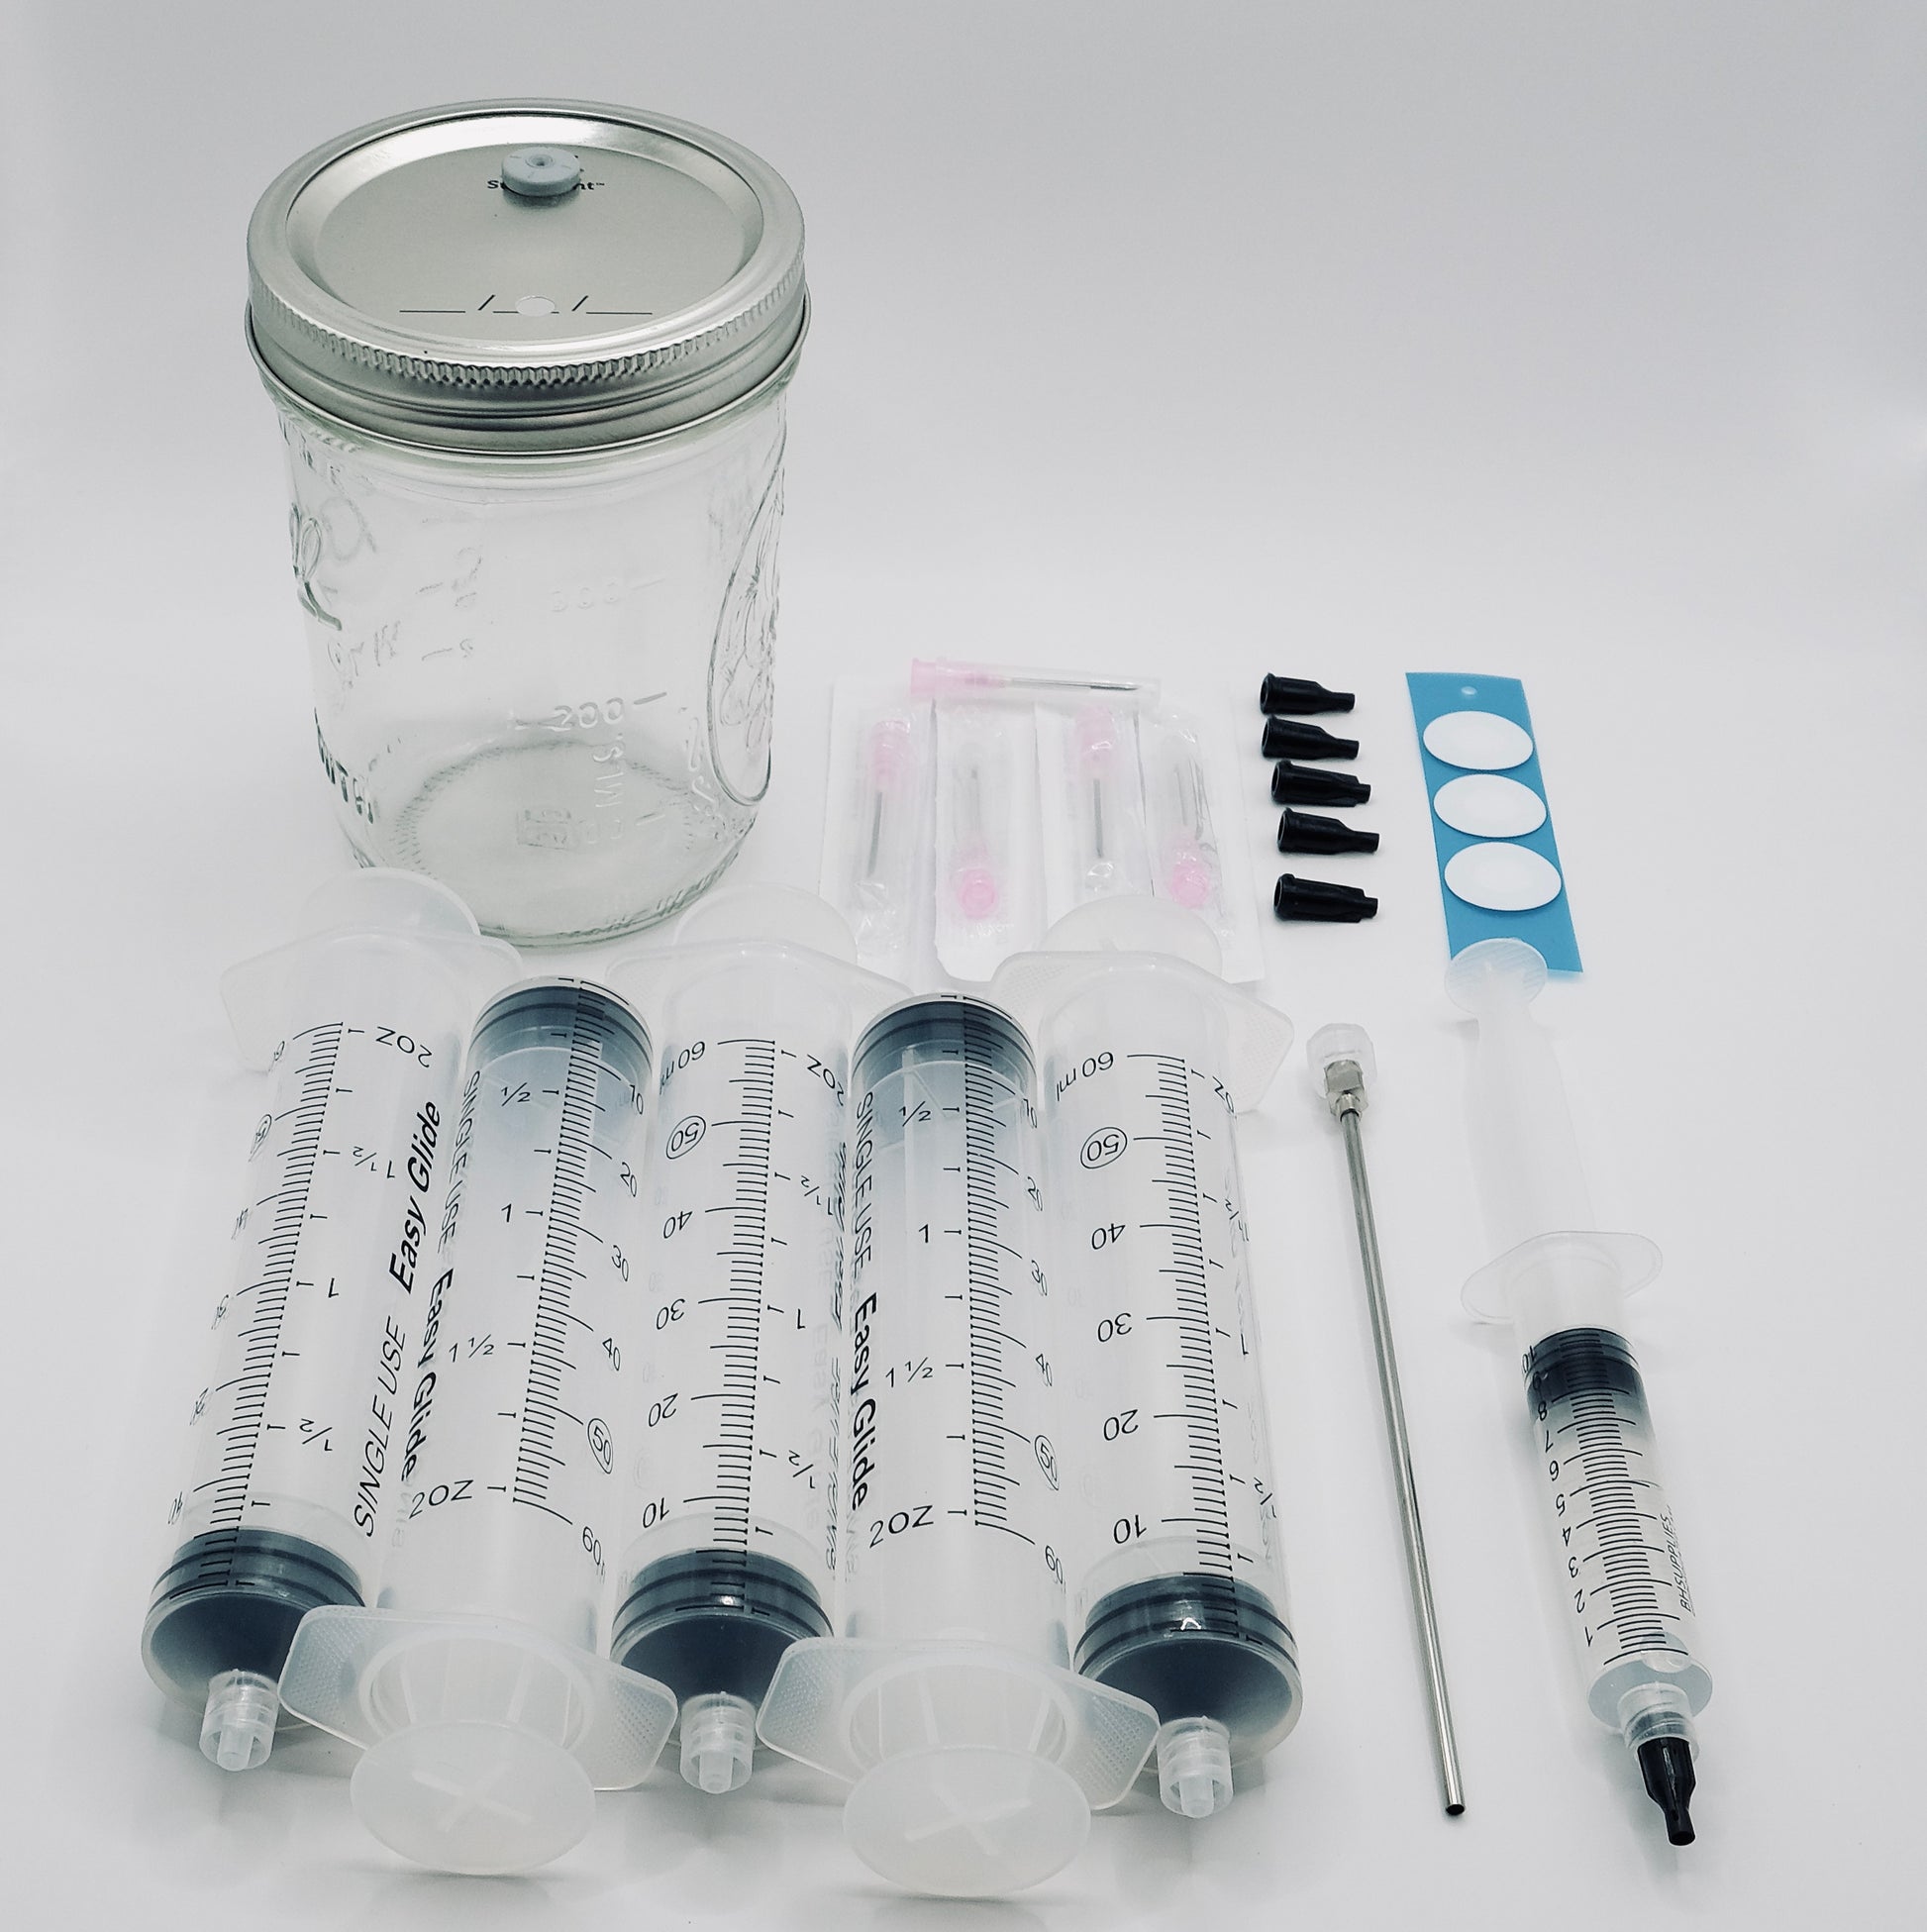 Injectable Liquid Culture Lids for Mushroom Cultivation